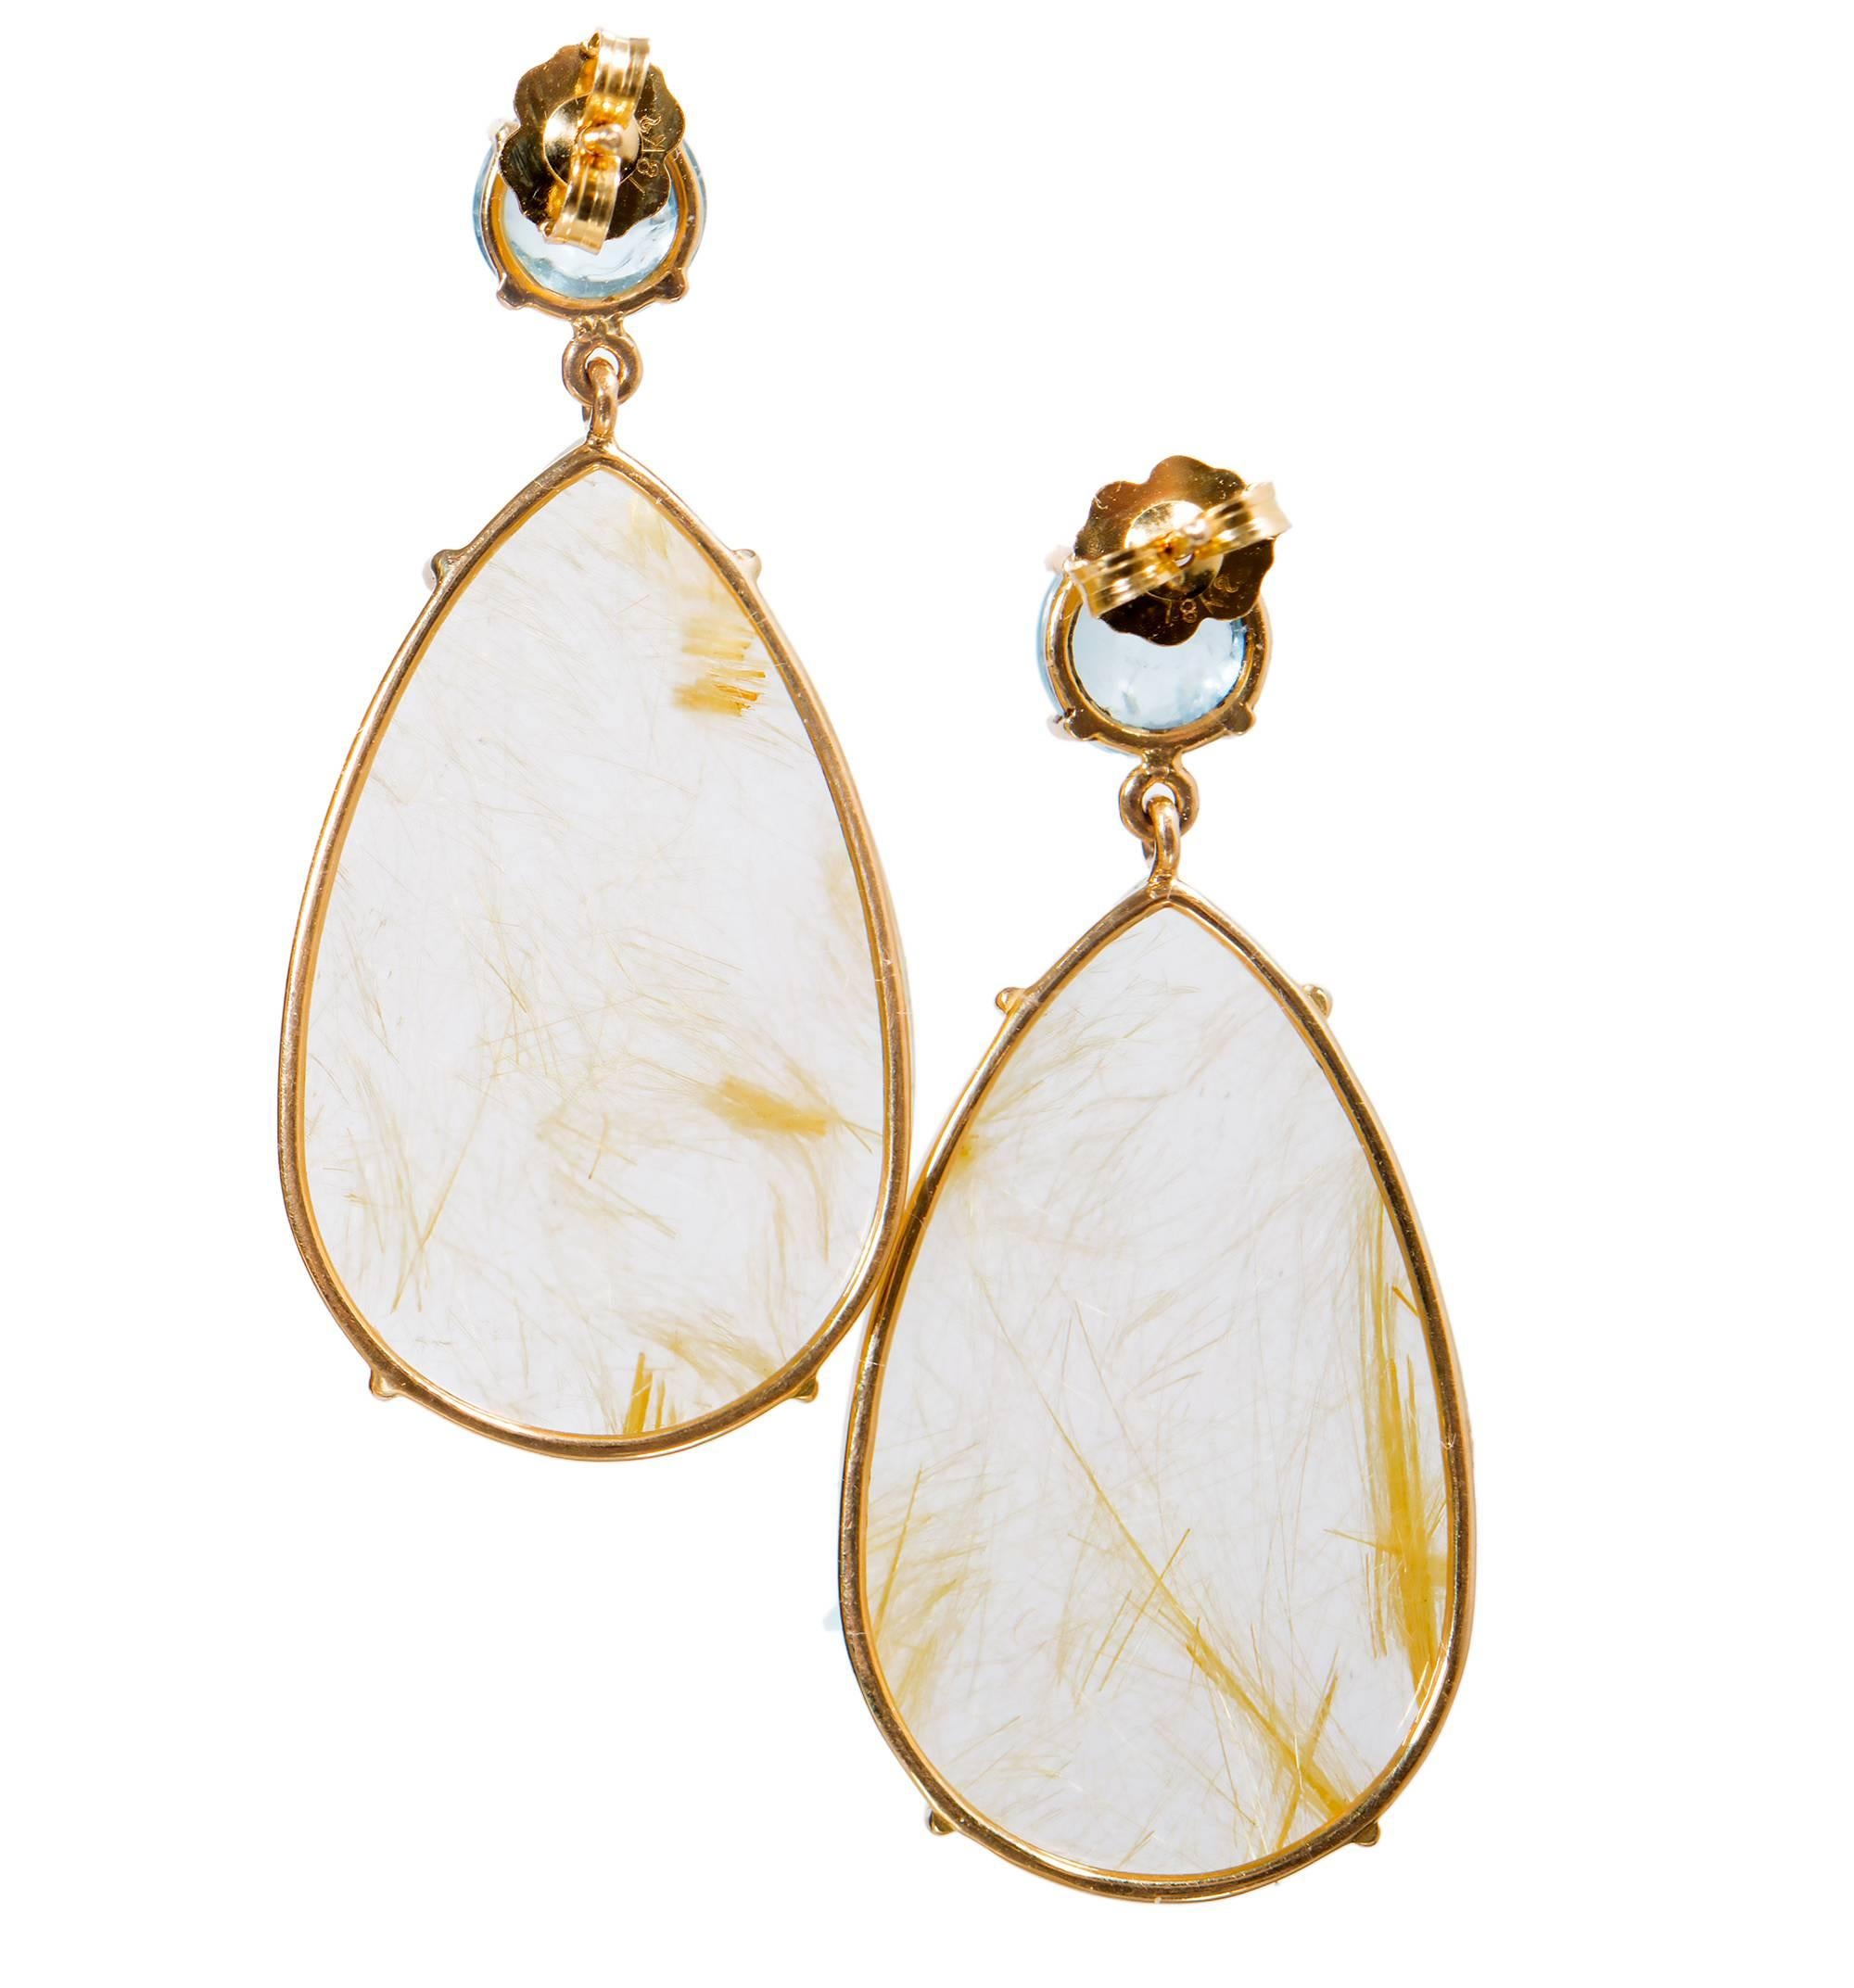 Handmade Aqua and quartz 18k yellow gold dangle earrings from the Peter Suchy Workshop.

2 round natural untreated Aqua 6.7mm cabochon, approx. total weight 2.88cts
2 pear shaped rutilated clear golden yellow Quartz 30 x 19mm, approx. total